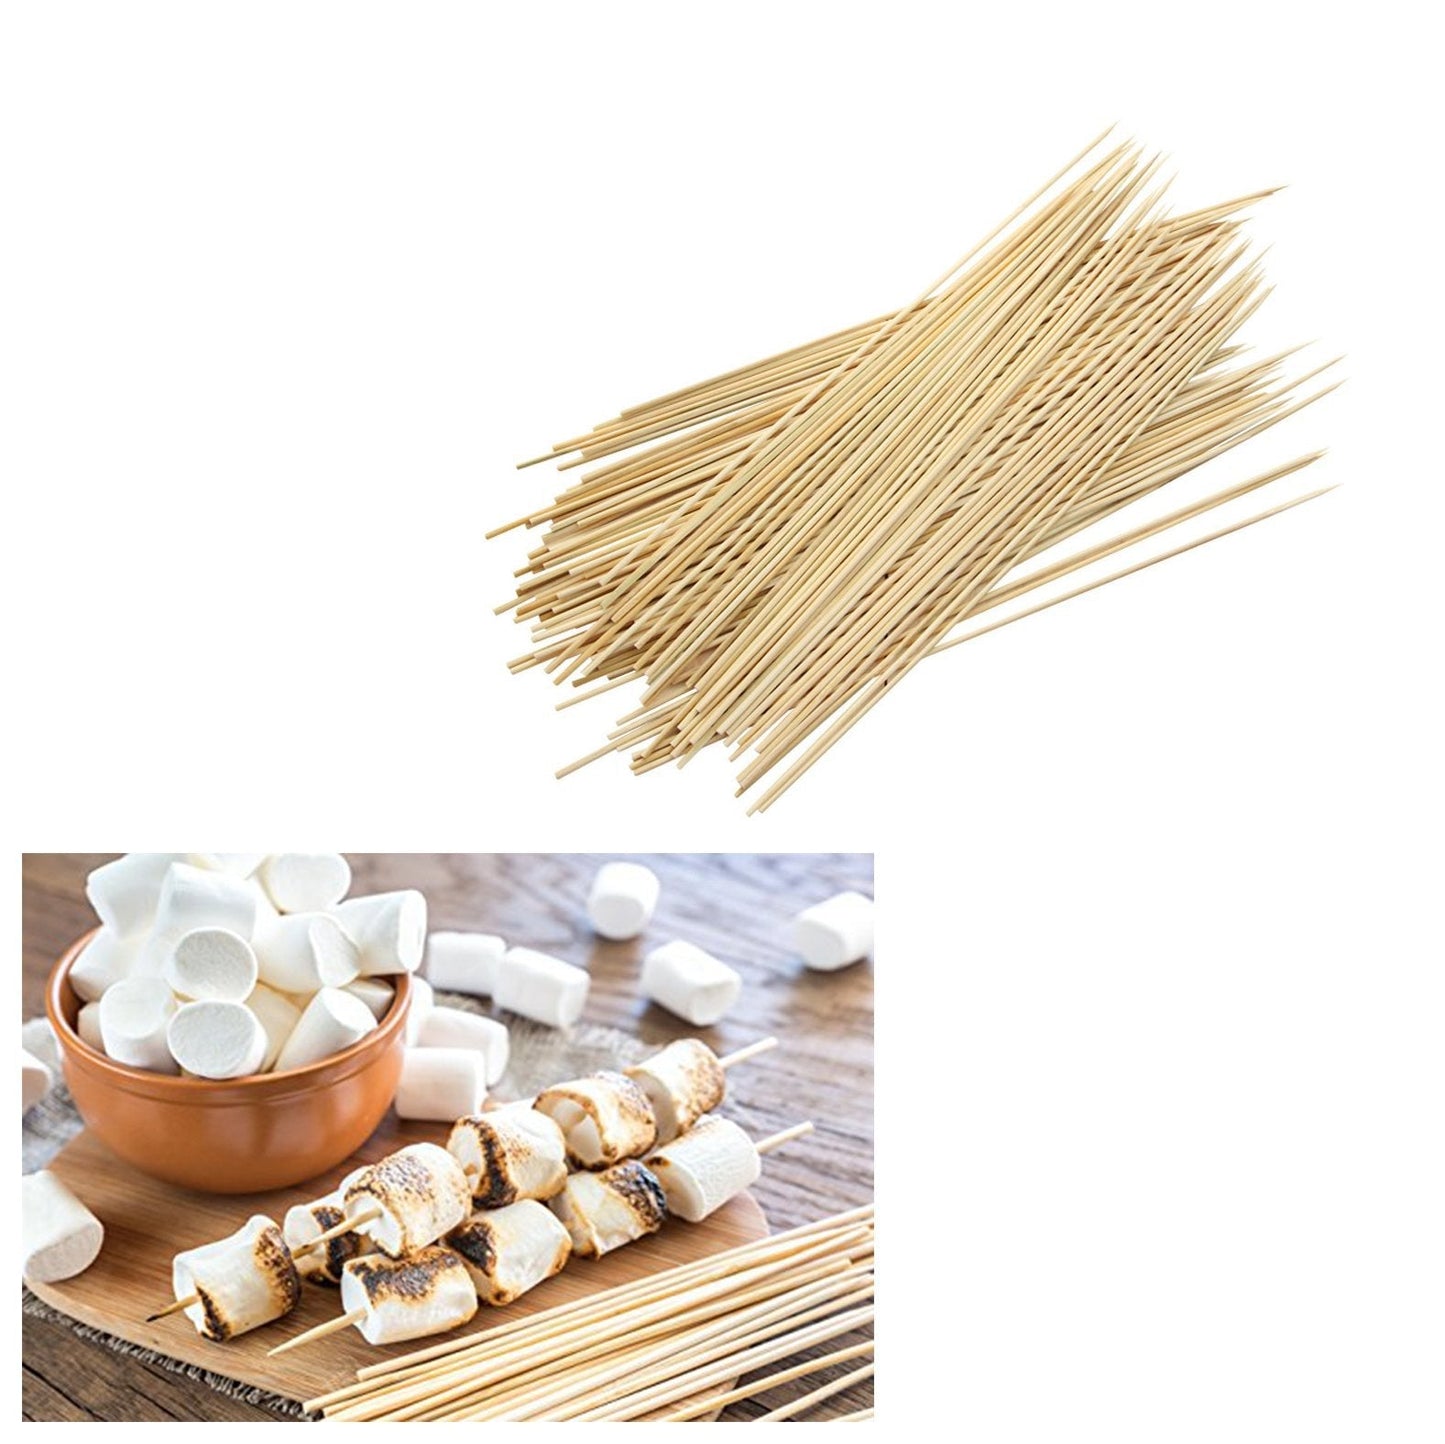 26cm Original BBQ Bamboo Skewer Sticks Perfect For Cocktails Kebabs Grills Fruit Marshmallows  0307 (Parcel Rate)